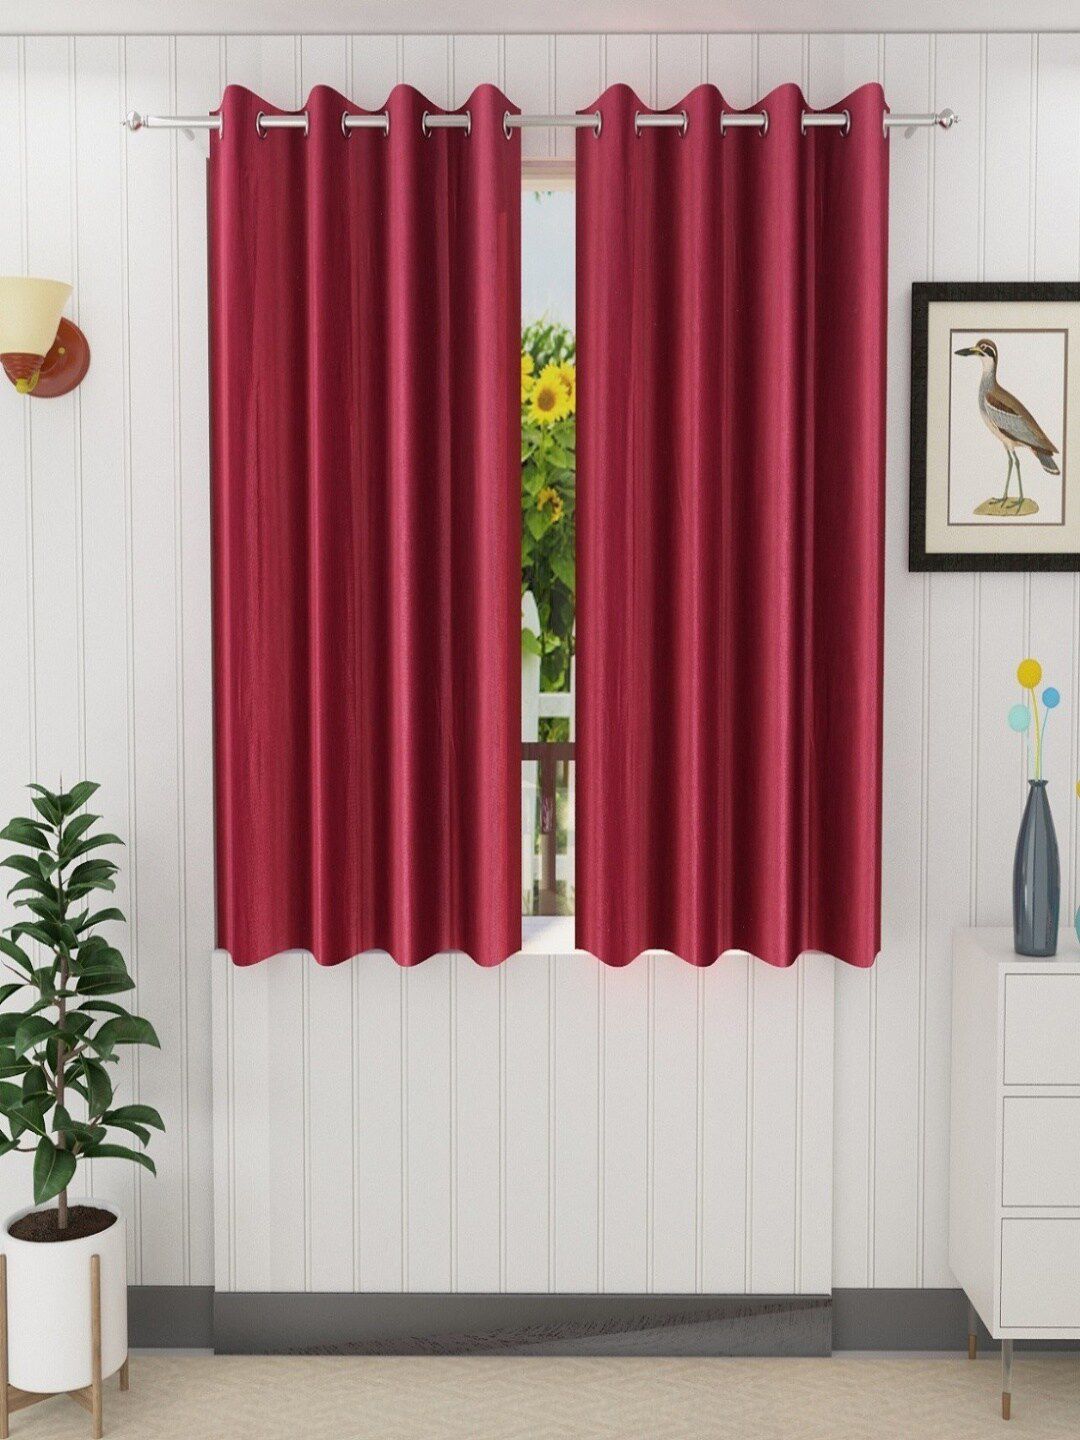 Homefab India Set of 2 Window Curtains Price in India